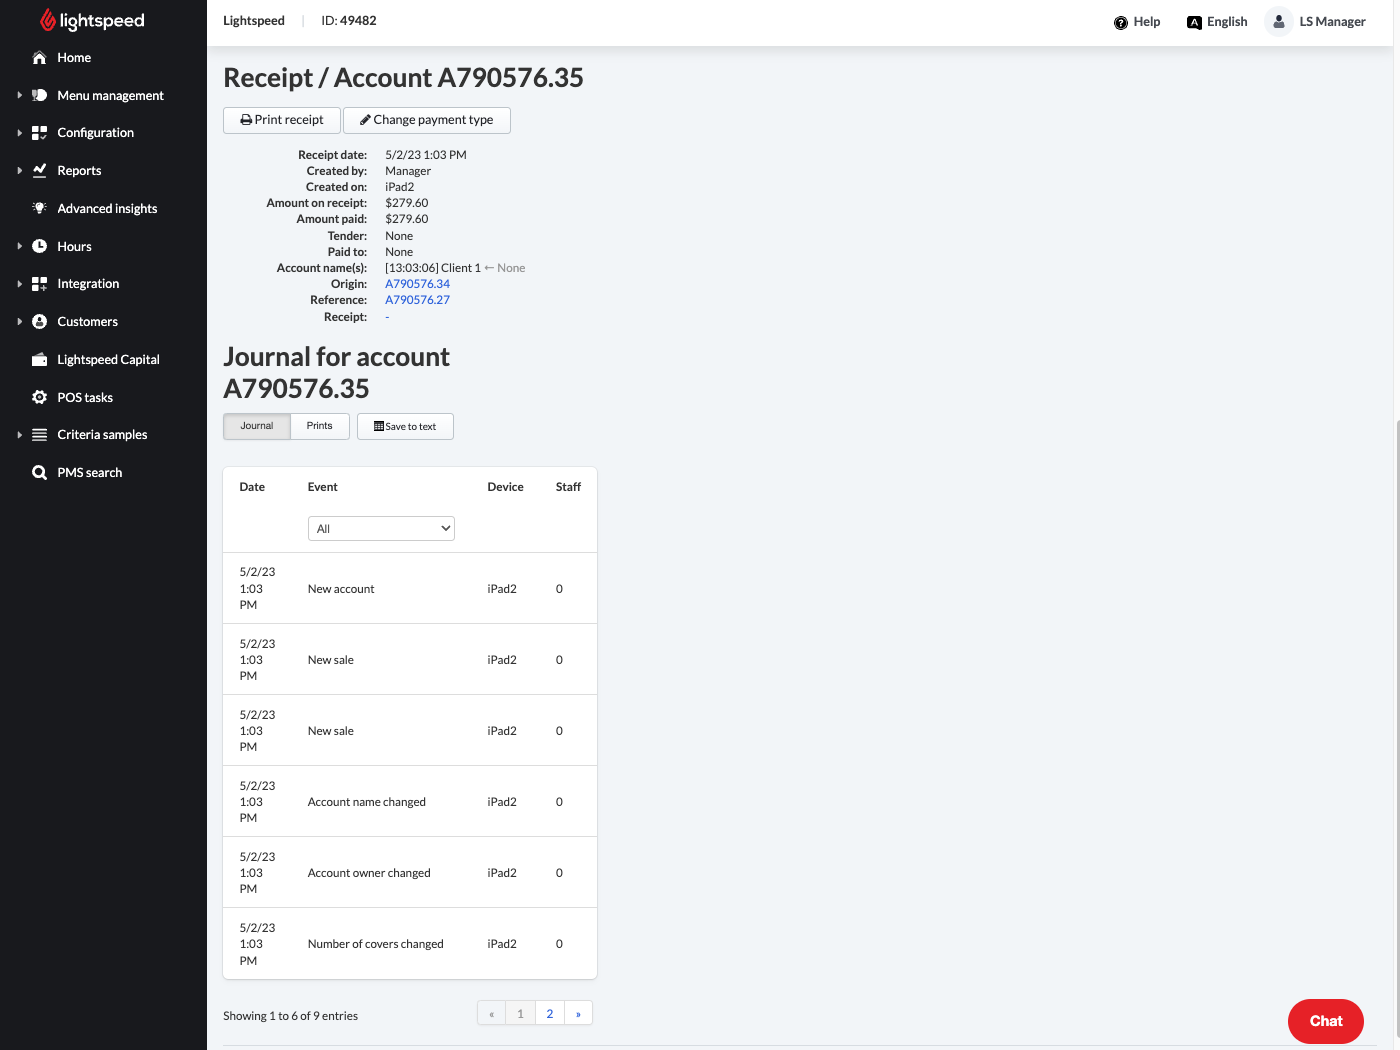 Clicking on a receipt from the Open Accounts report allows you to view more details about the transaction.